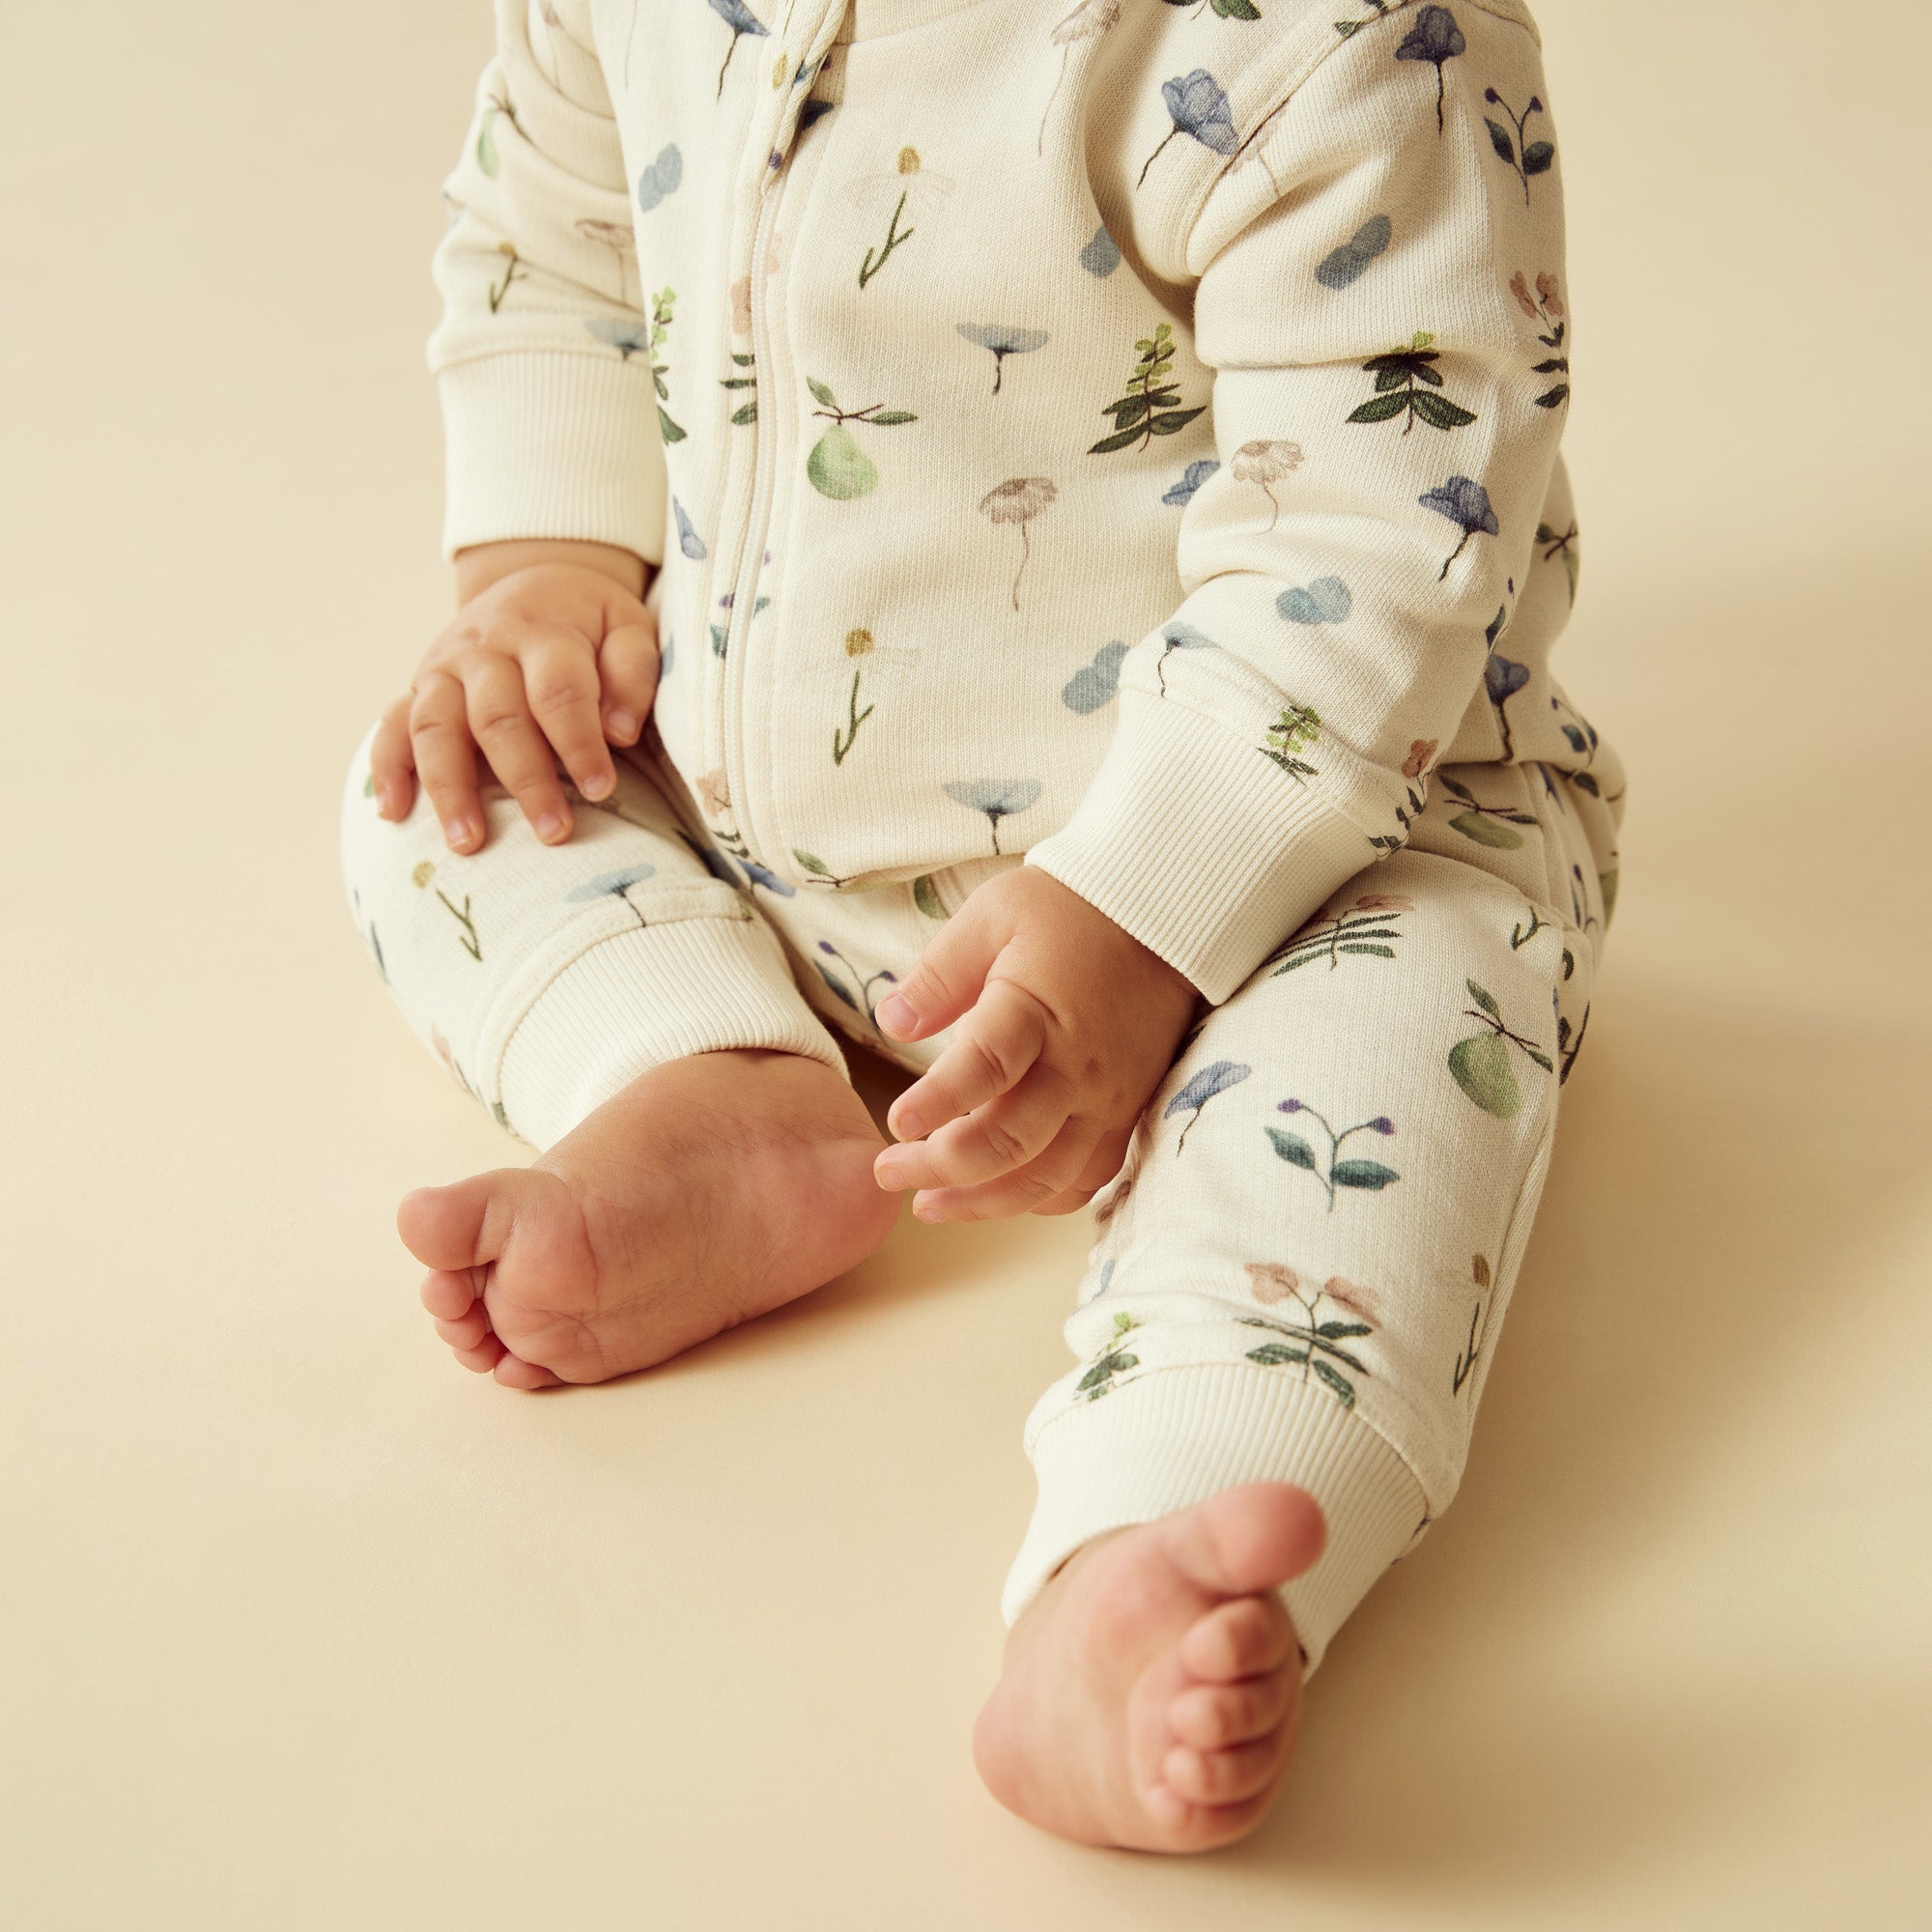 Wilson & Frenchy Petit Garden Organic French Terry Zipsuit